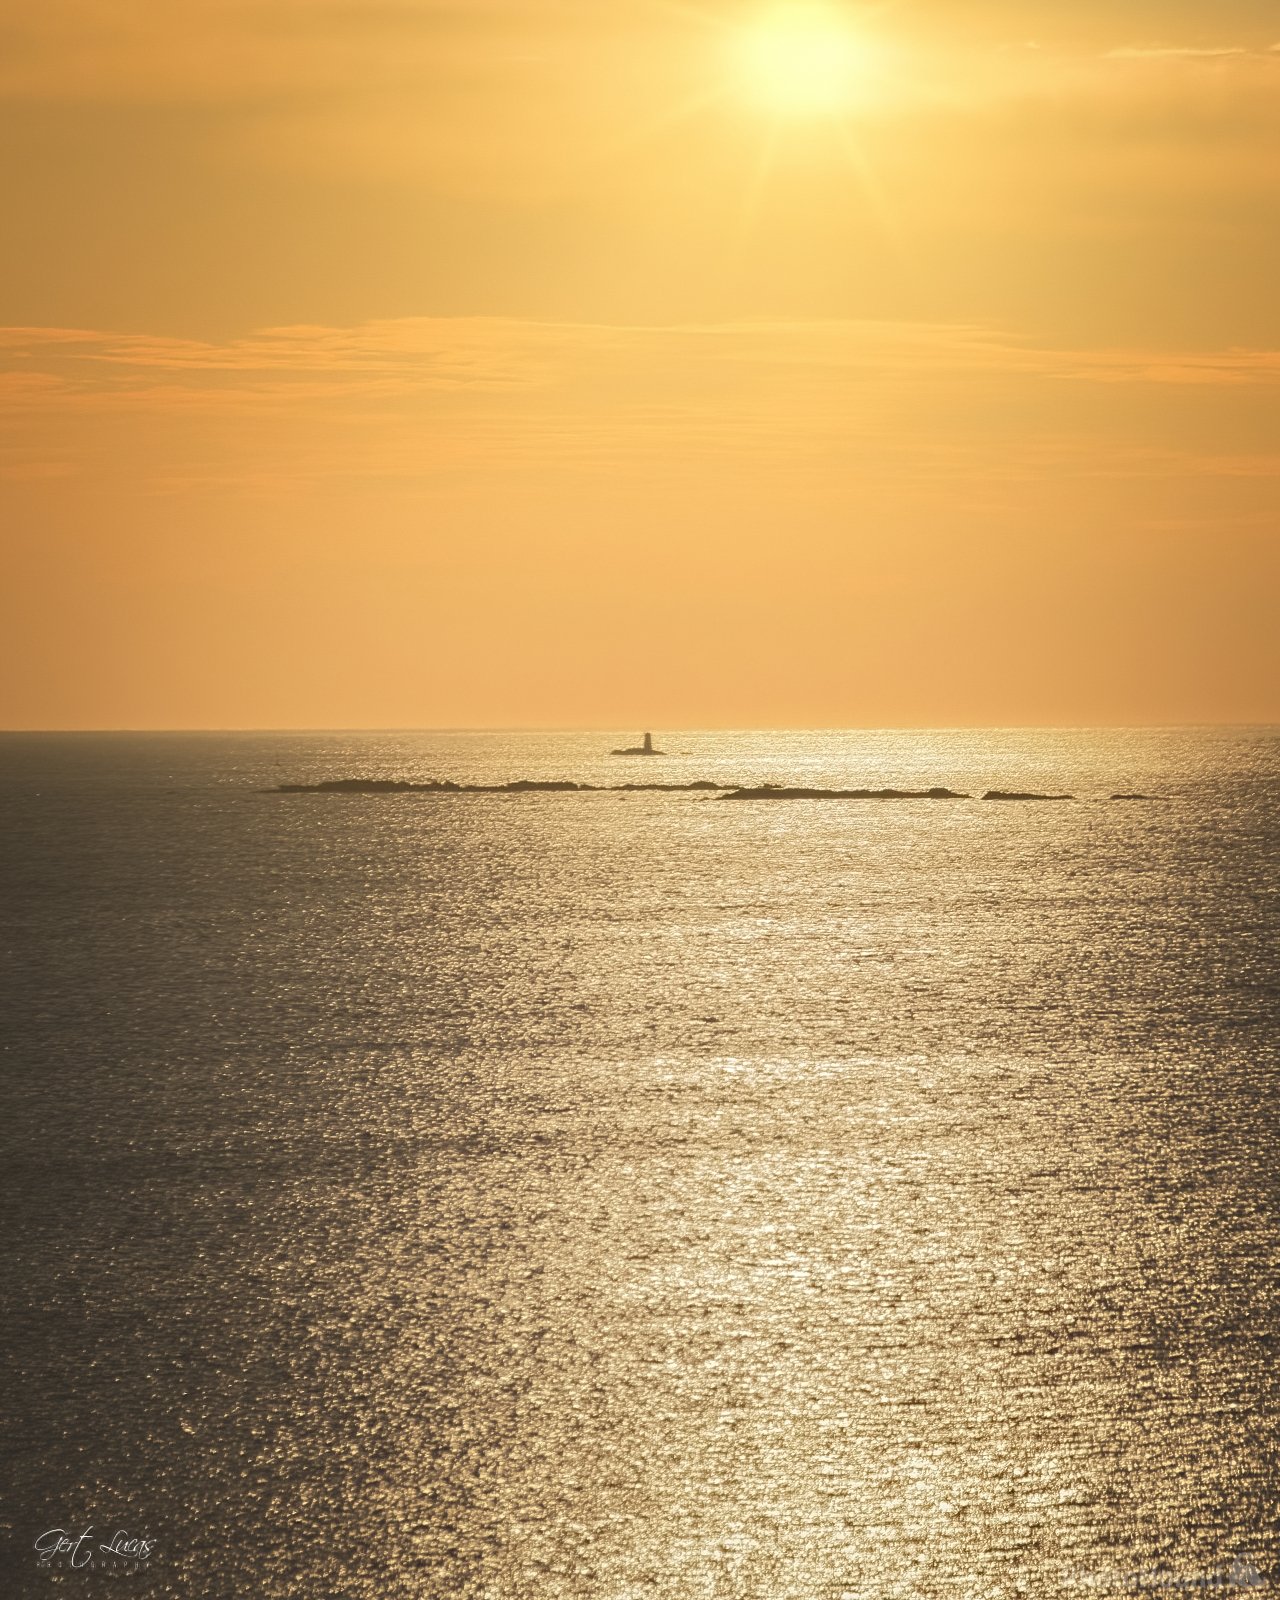 Image of Pointe du Grouin, Cancale, France - Sunset viewpoint by Gert Lucas